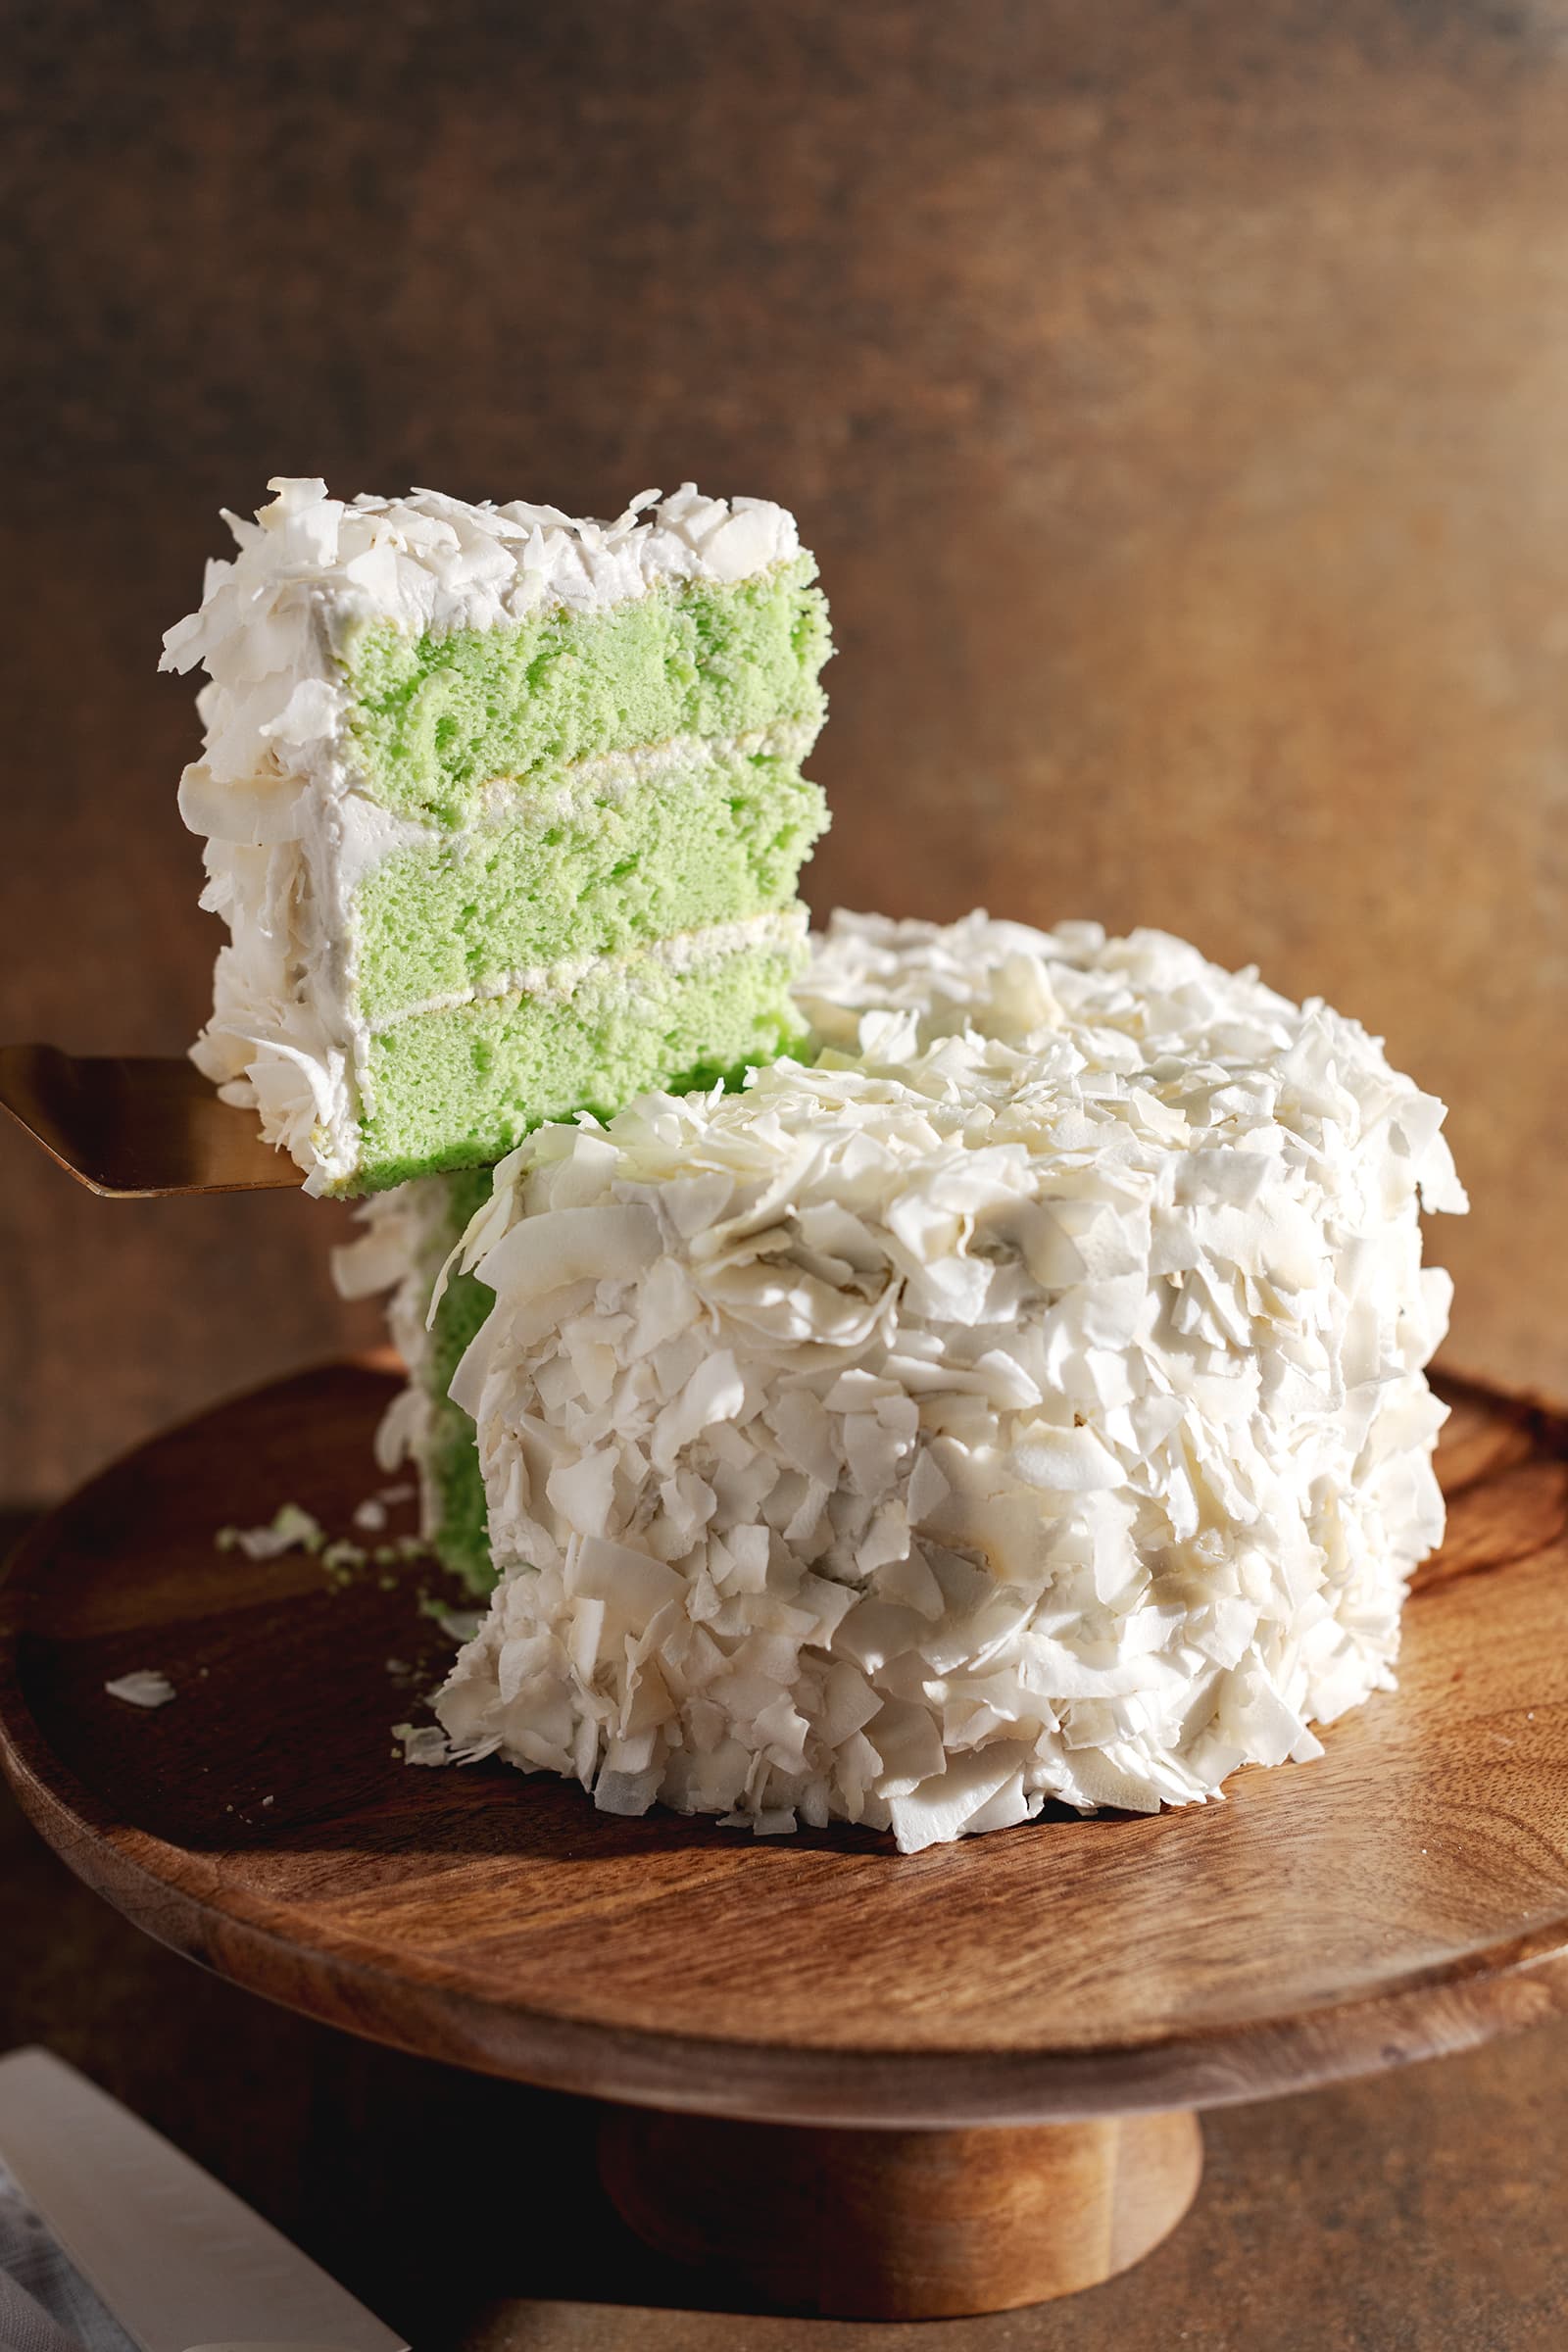 A slice of pandan coconut cake being lifted from the whole cake with a cake server.